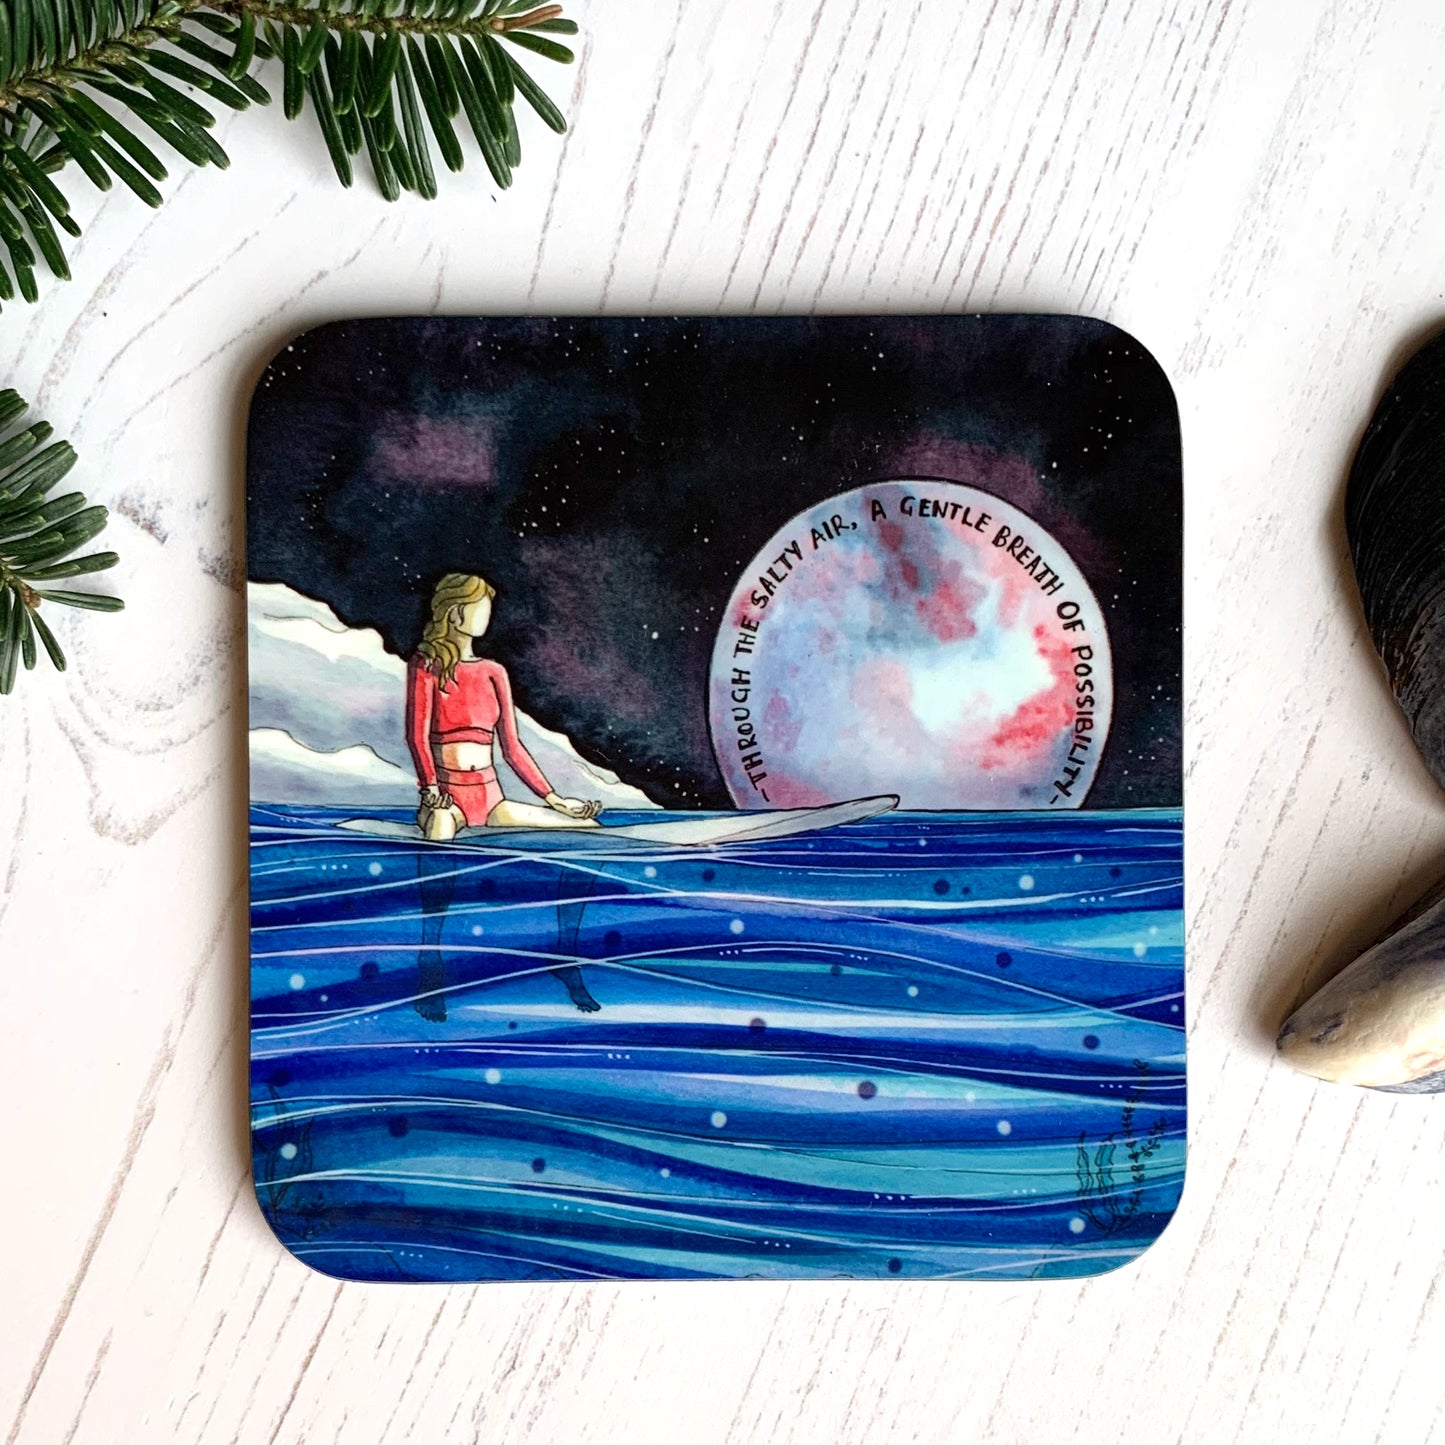 Surf Girl Coaster - Full Moon Possibility